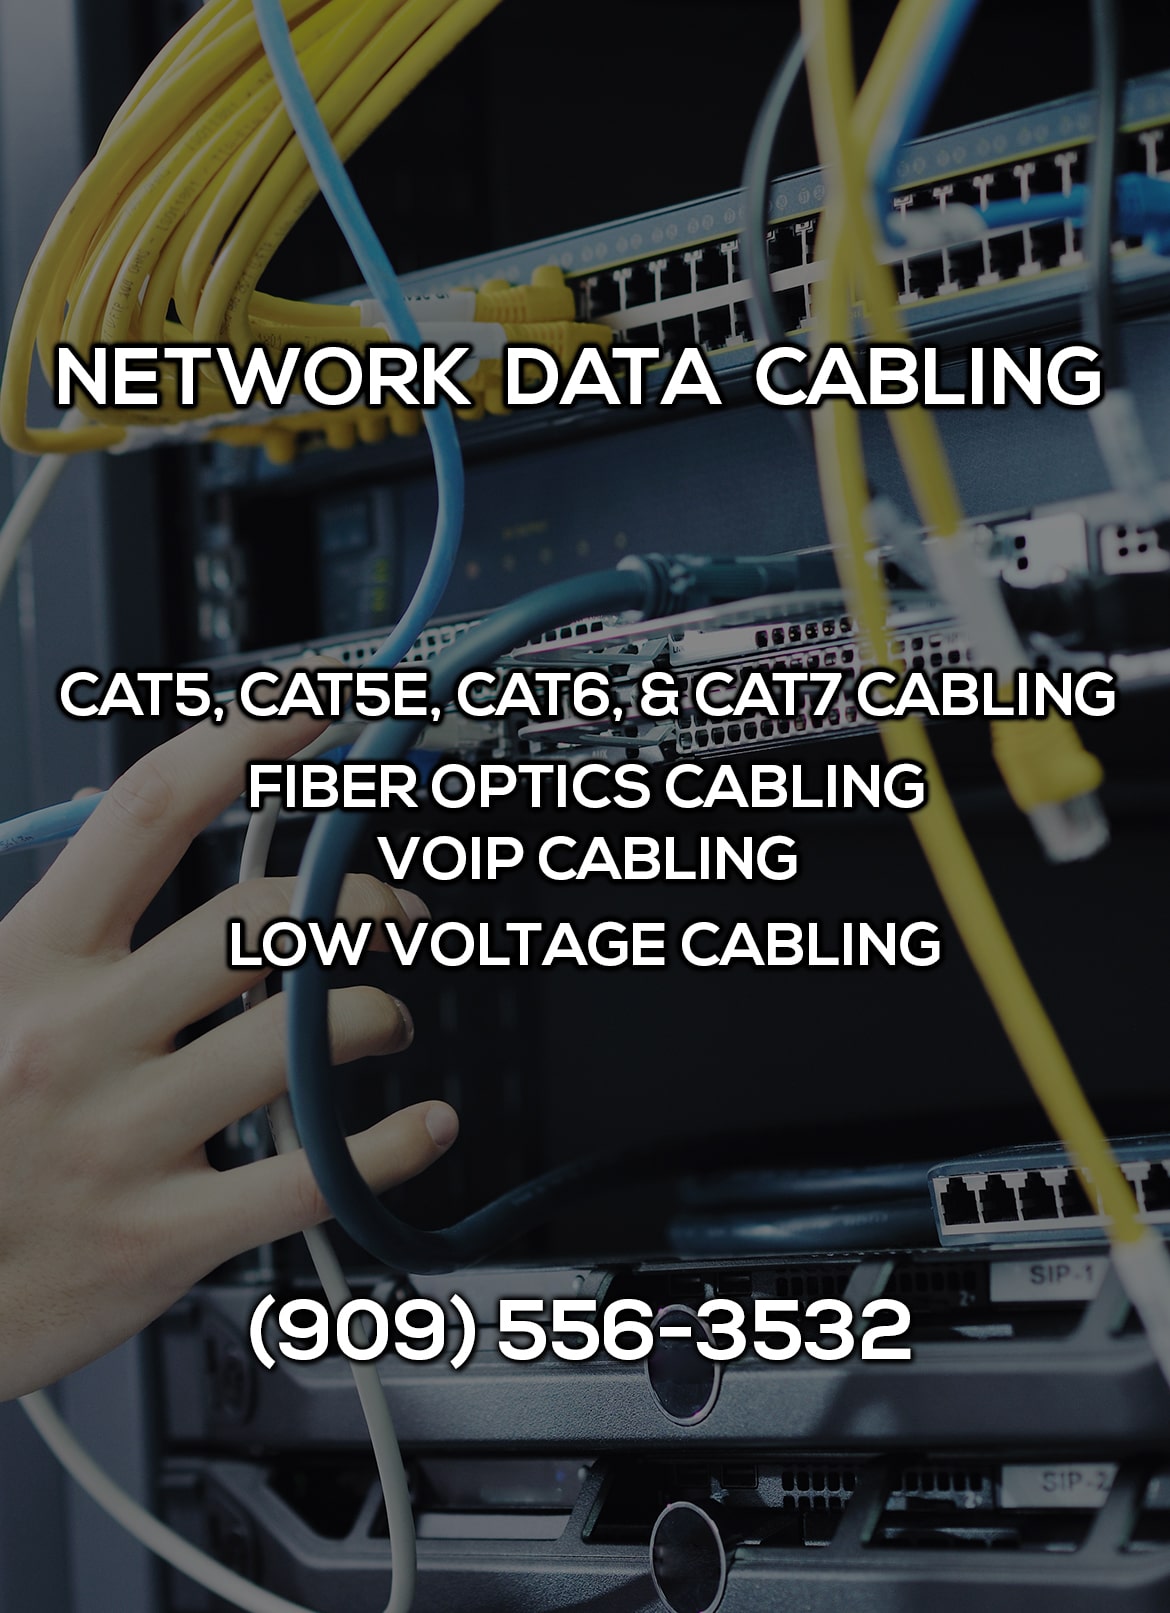 Network Data Cabling in Rancho Mirage CA